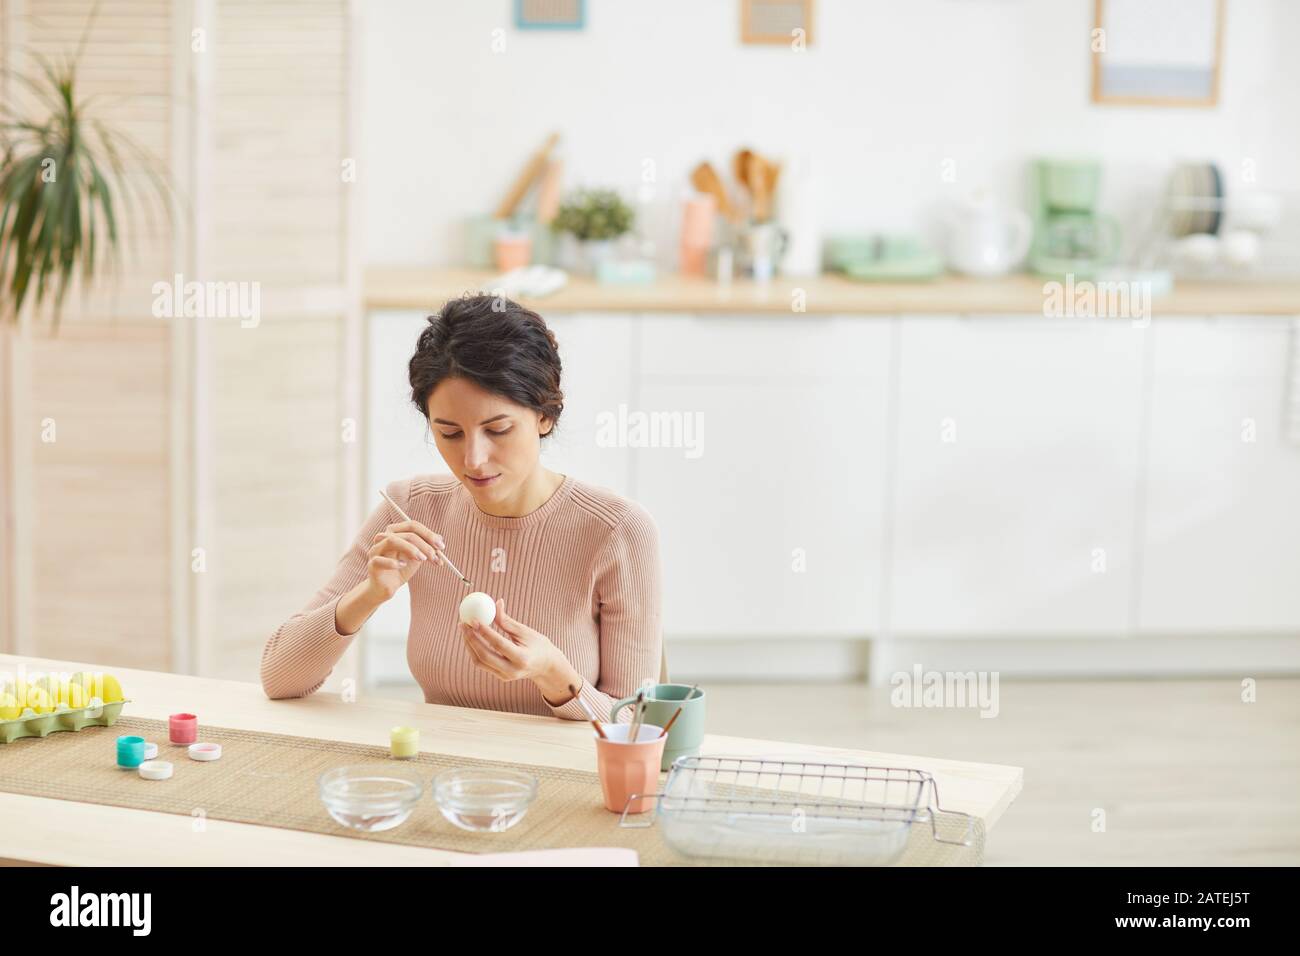 Wide angle portrait of adult woman painting Easter eggs in light kitchen interior, copy space Stock Photo